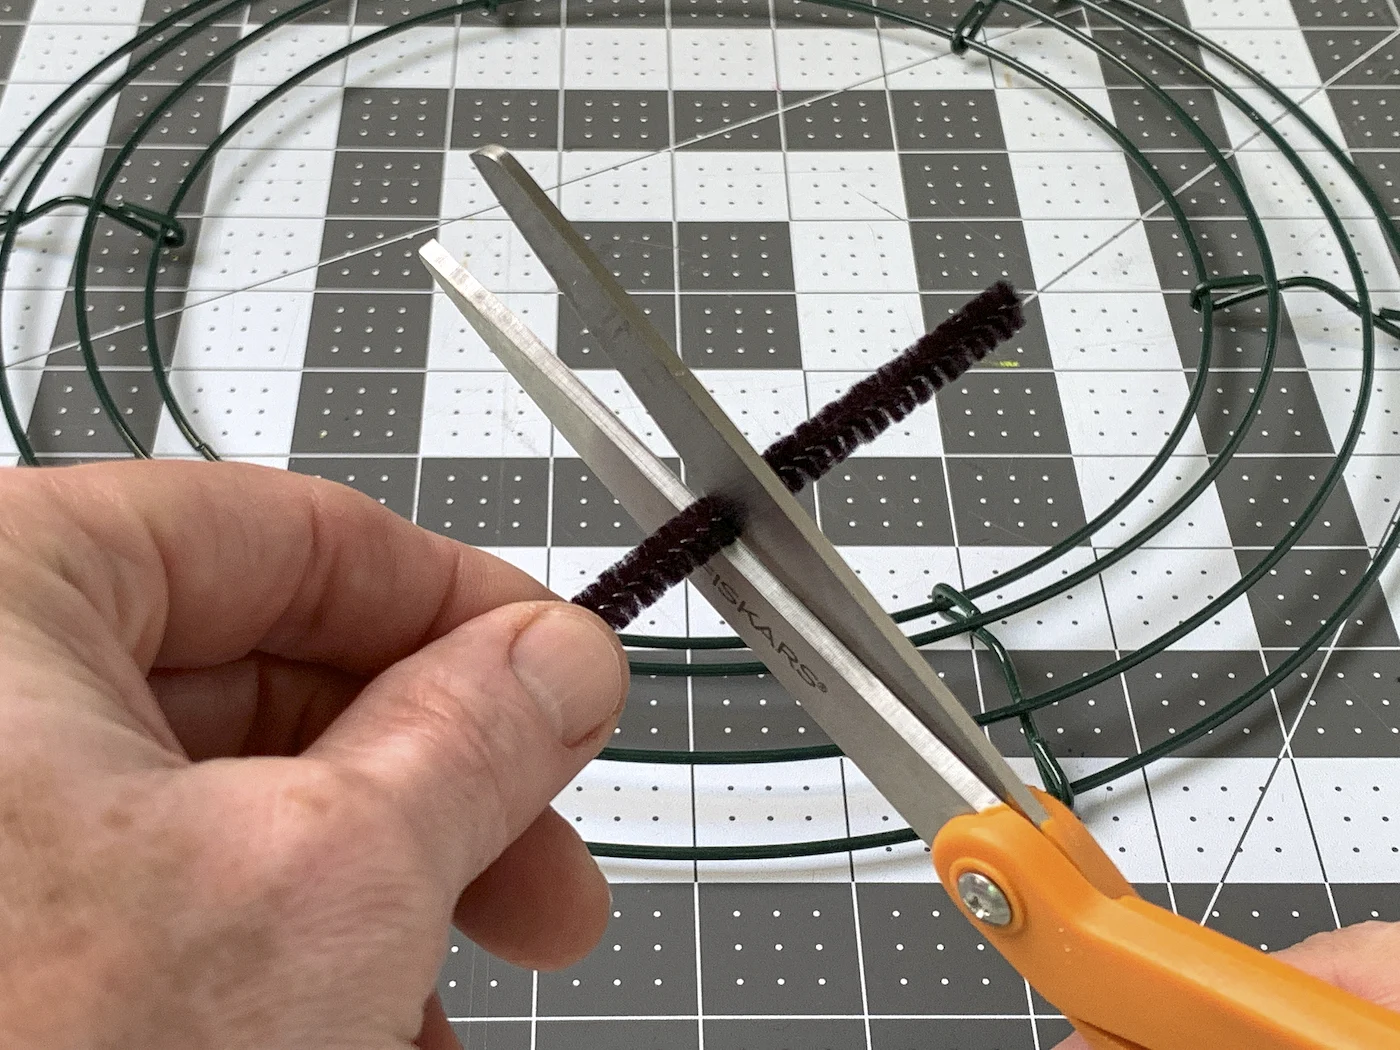 Cutting a black pipe cleaner with a pair of scissors